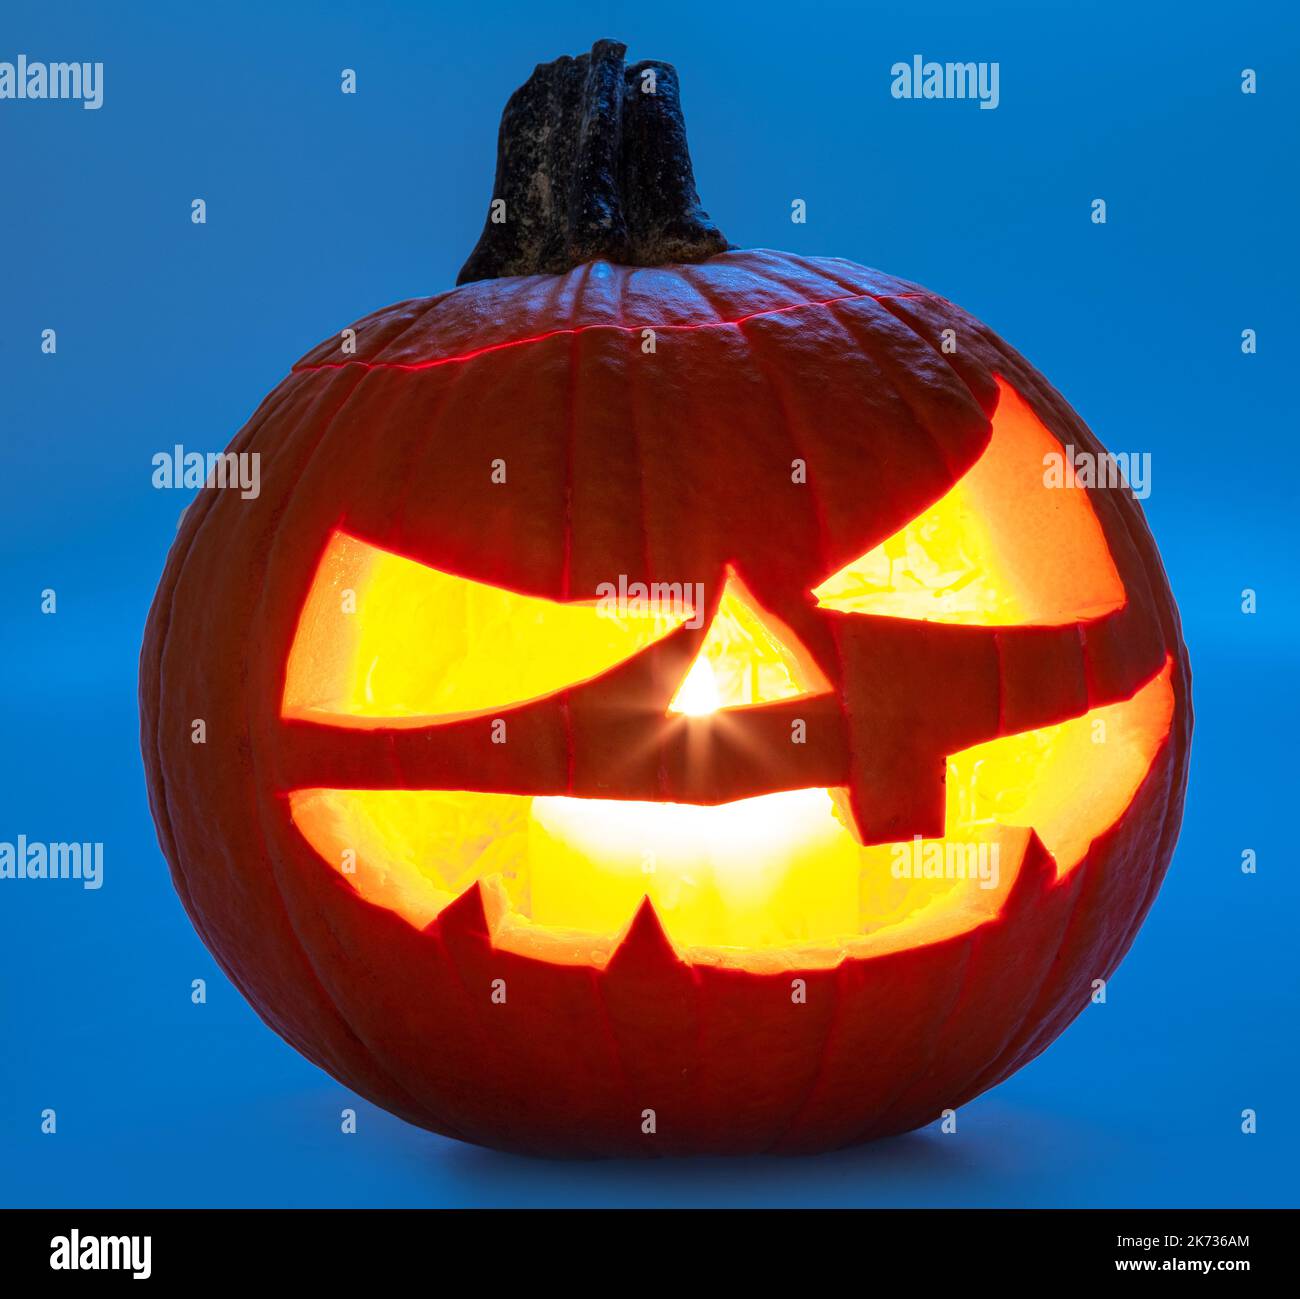 Carved pumpkin for Halloween jack-o'-lanterns with scary smiles and burning candle inside isolated on blue background. Stock Photo